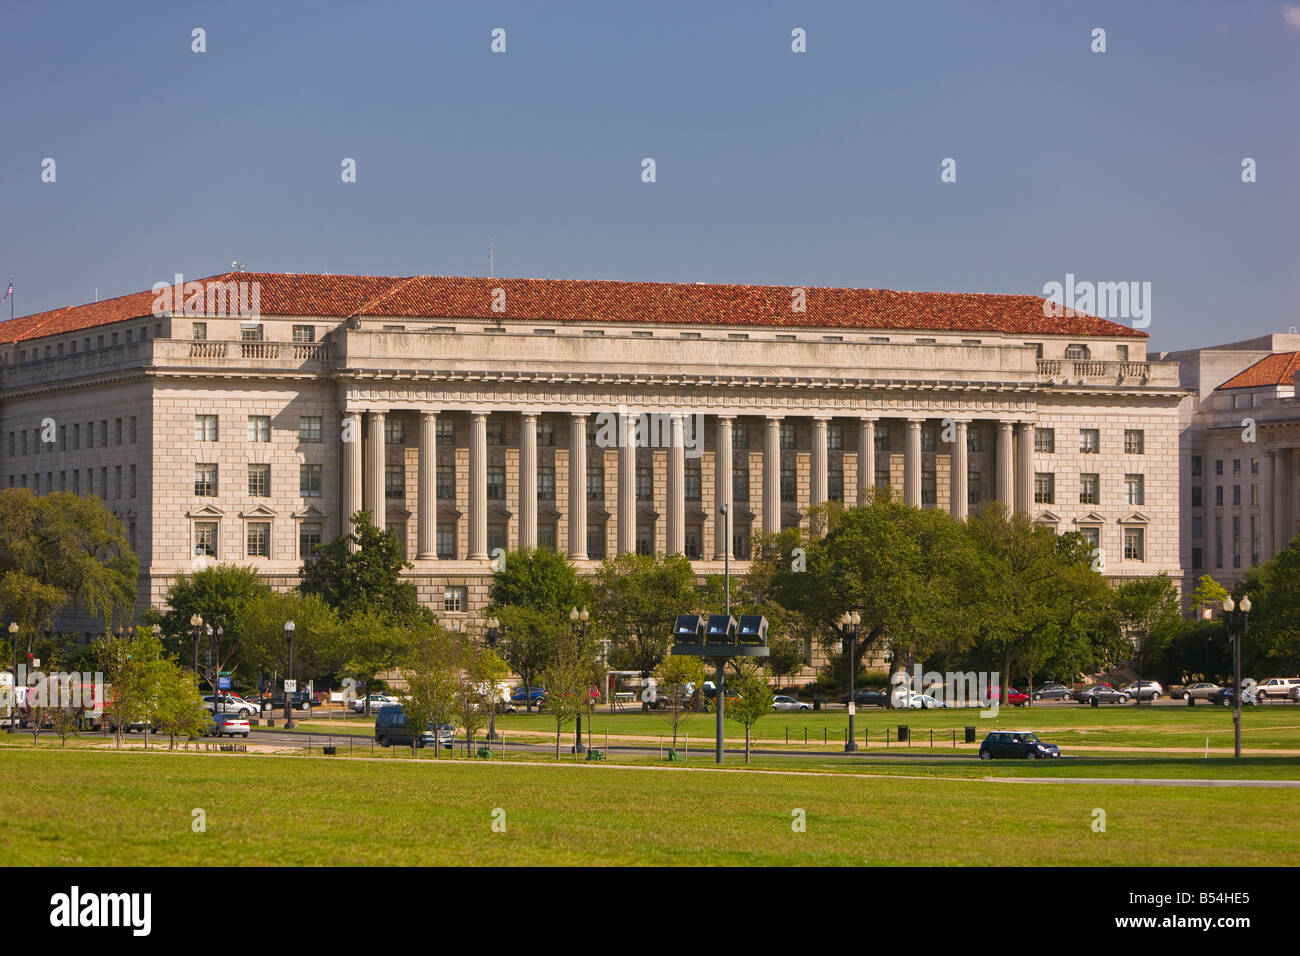 WASHINGTON, DC, USA - Department of Commerce building, Constitution Avenue, auf der National Mall. Stockfoto